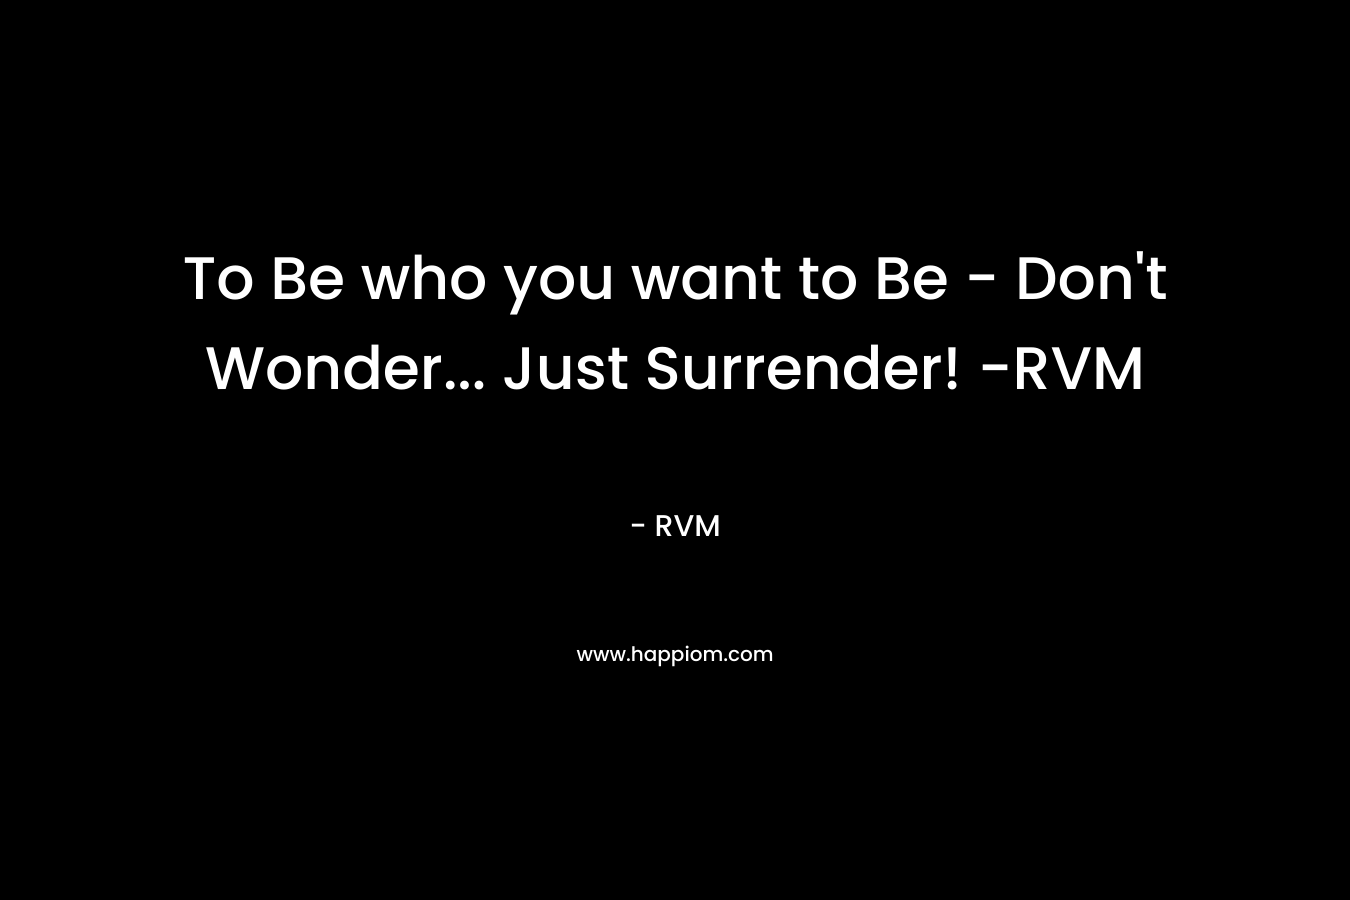 To Be who you want to Be - Don't Wonder... Just Surrender! -RVM